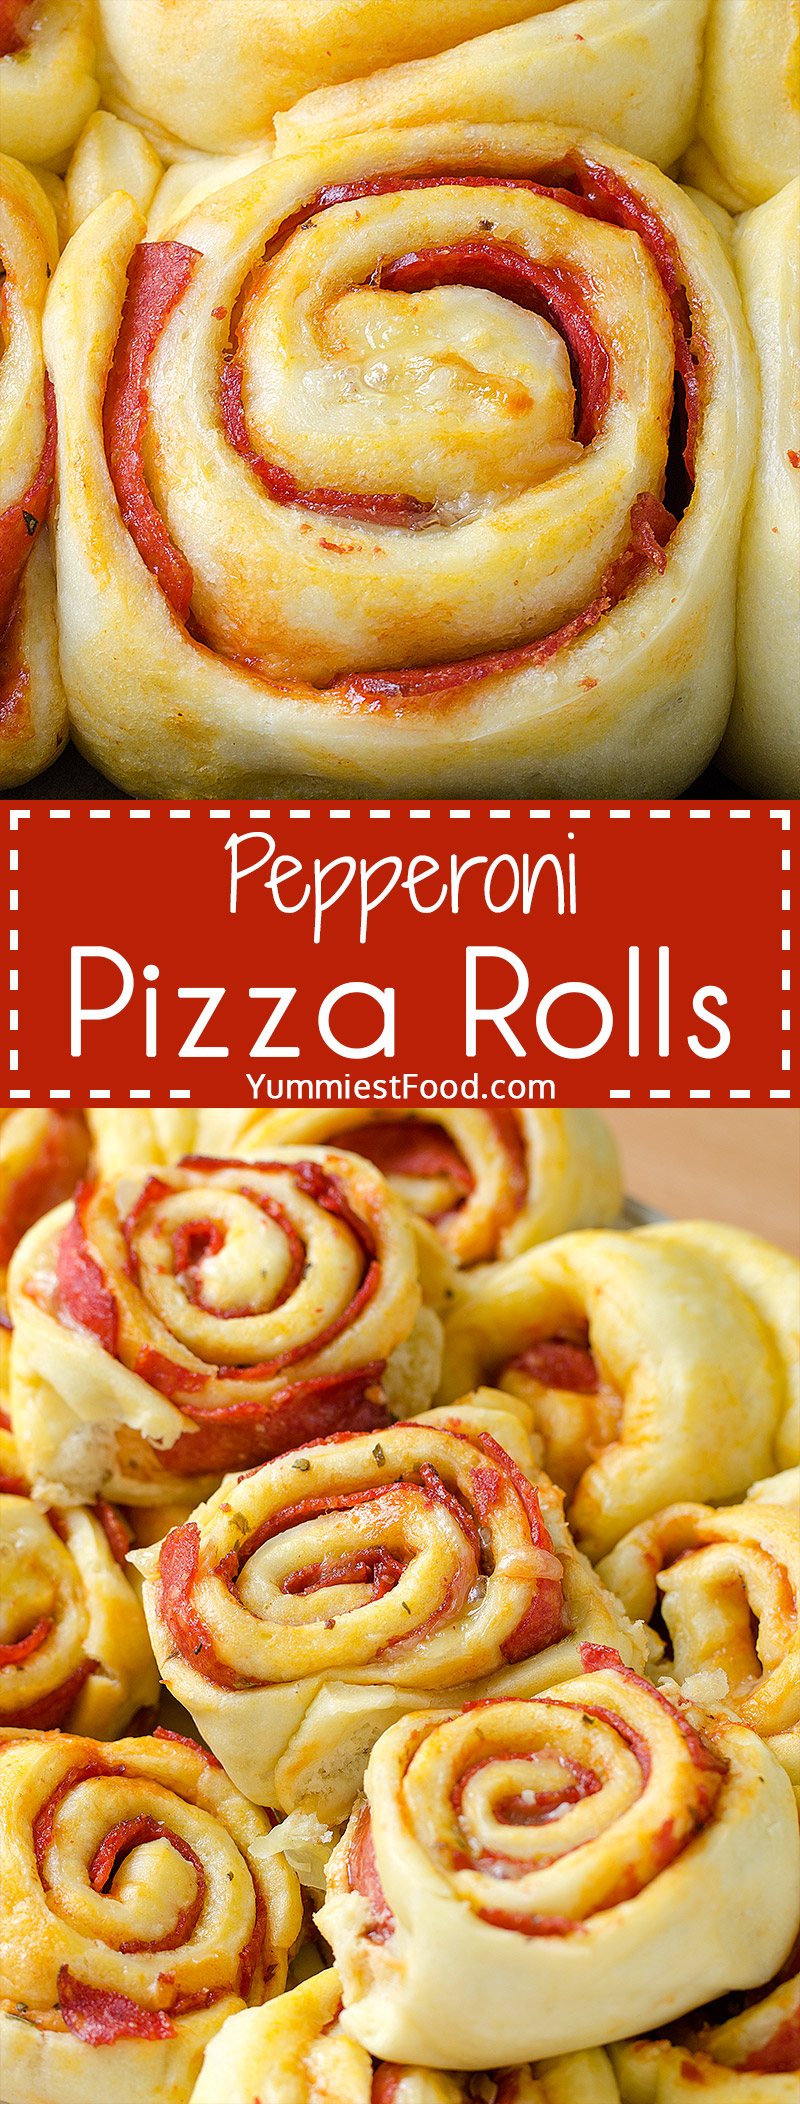 Pepperoni Pizza Rolls – so nice and easy way to enjoy pizza. These Pepperoni Pizza Rolls are perfect for every occasion.